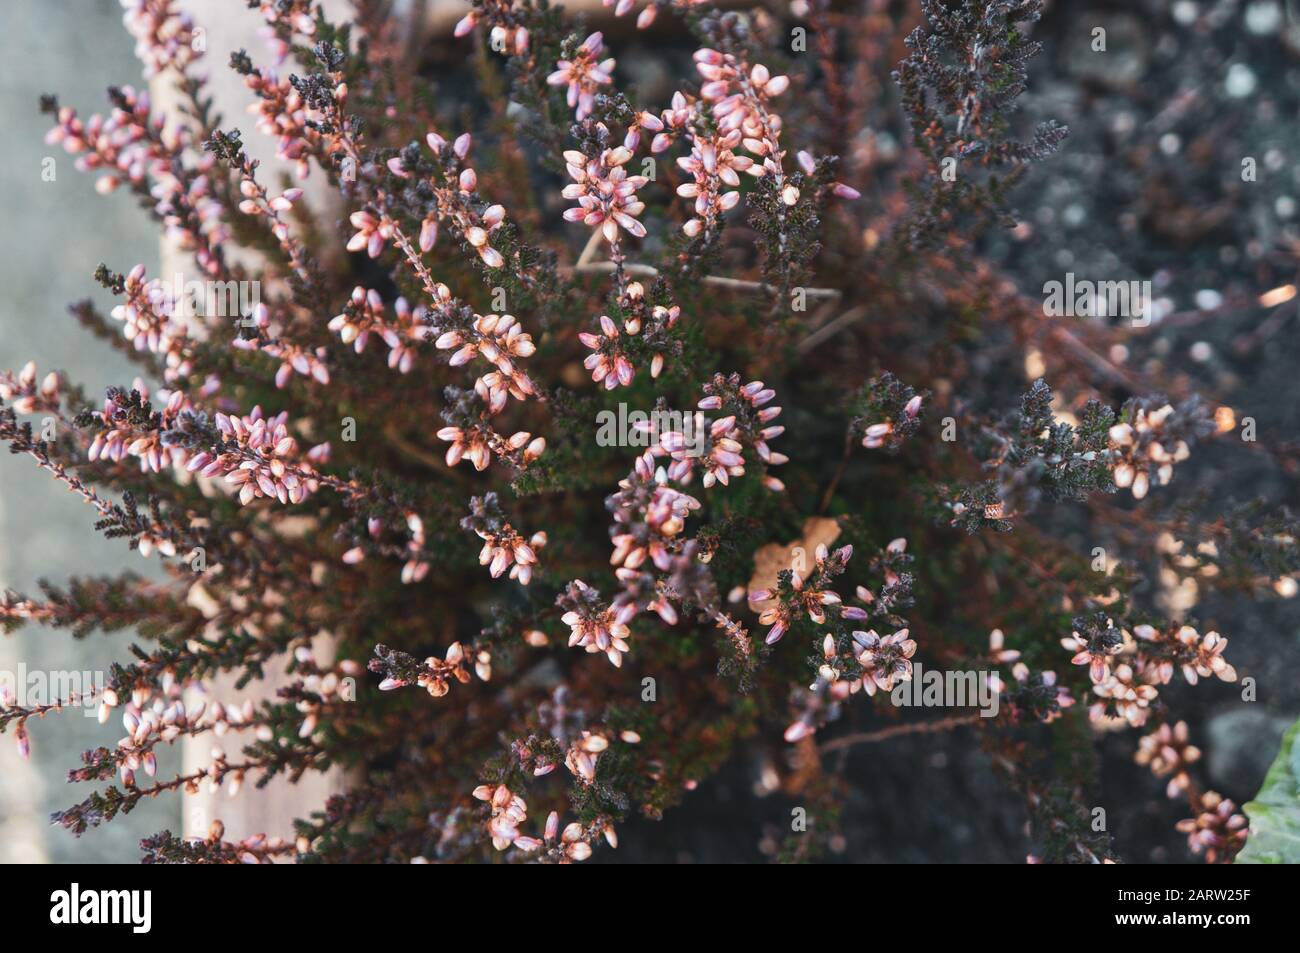 Warm toned macro photo from above of small pink flowers and buds blooming on dark green spiky branches. Romantic and passionate feeling. Shot in dayli Stock Photo